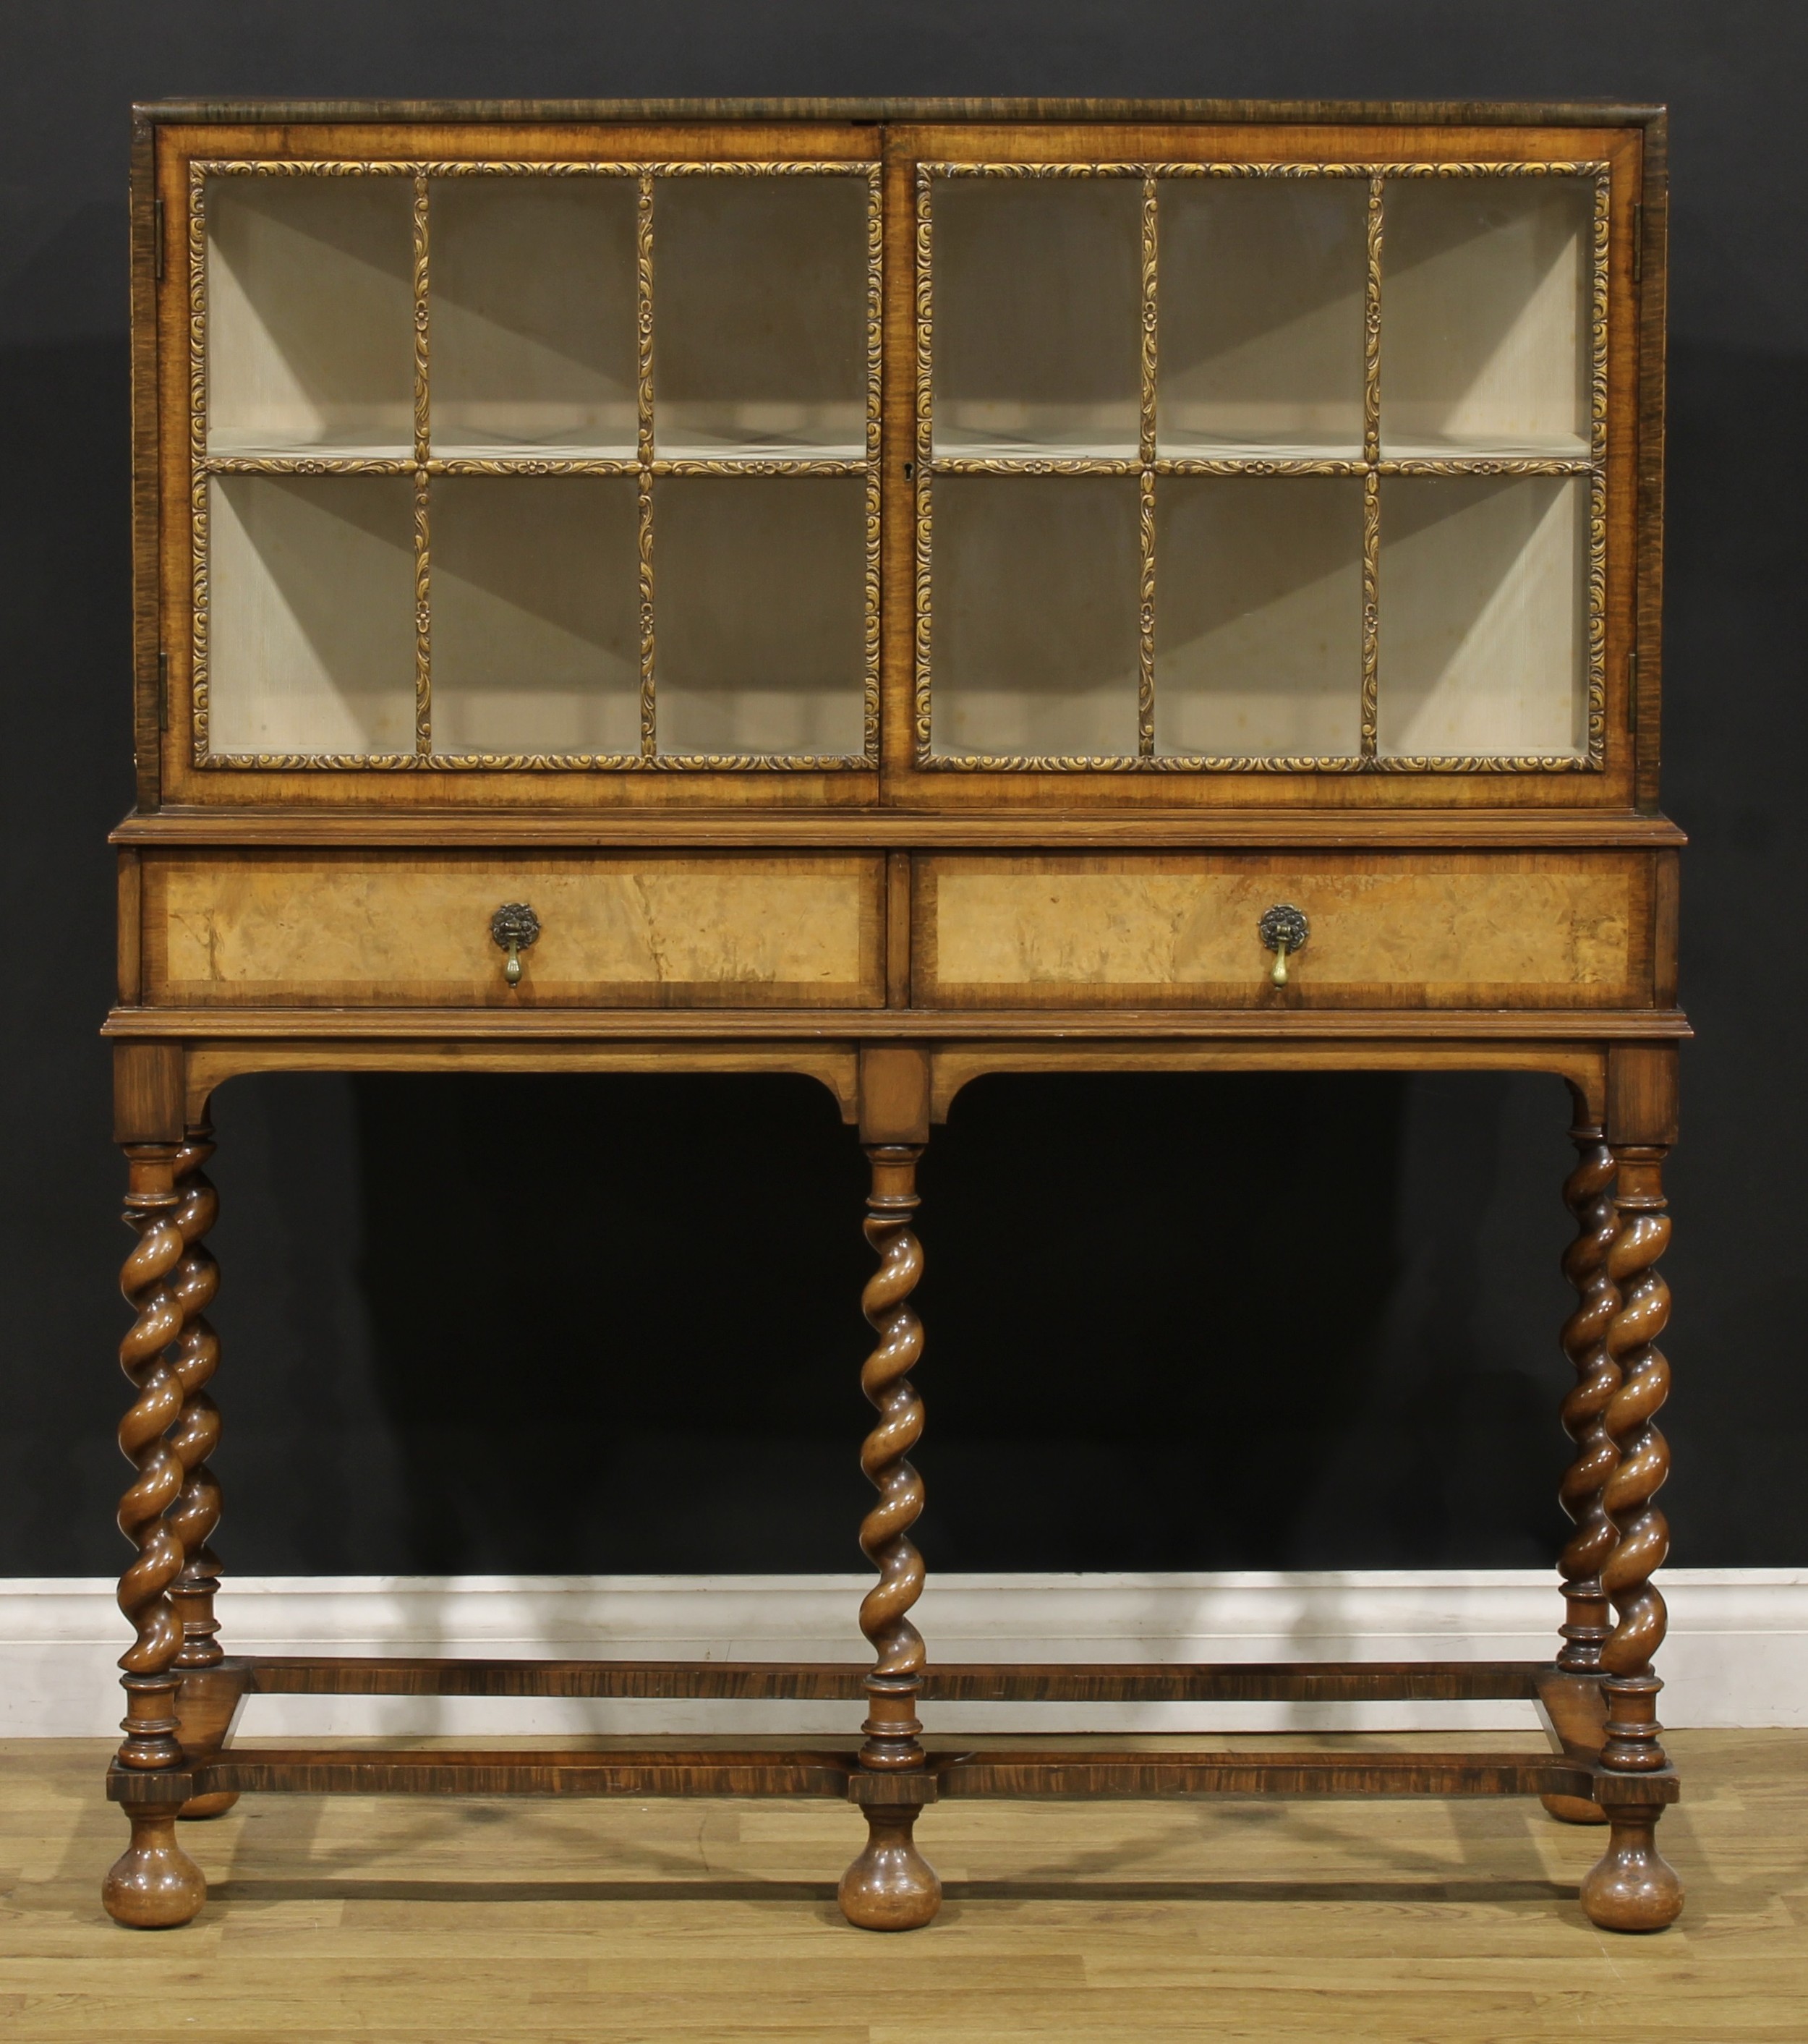 An early 20th century Queen Anne style walnut bookcase or display cabinet, by Hamptons, Pall Mall - Image 2 of 7